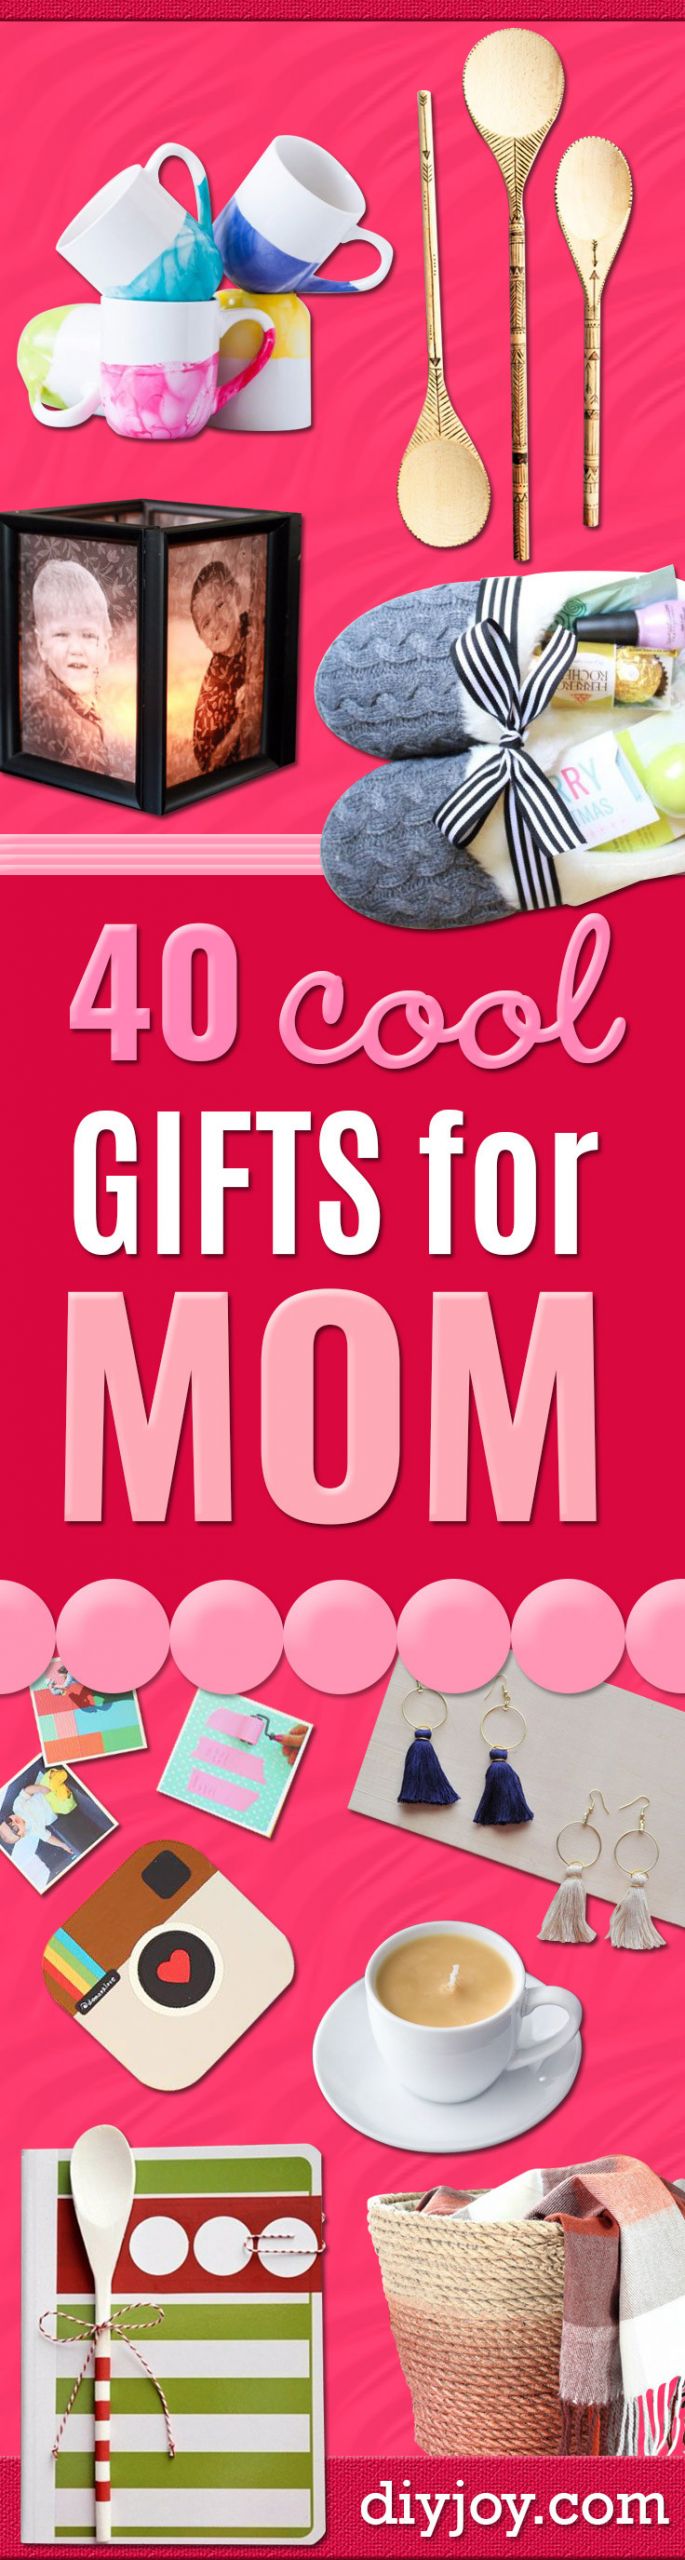 DIY Gifts For Your Mom
 40 Coolest Gifts To Make for Mom